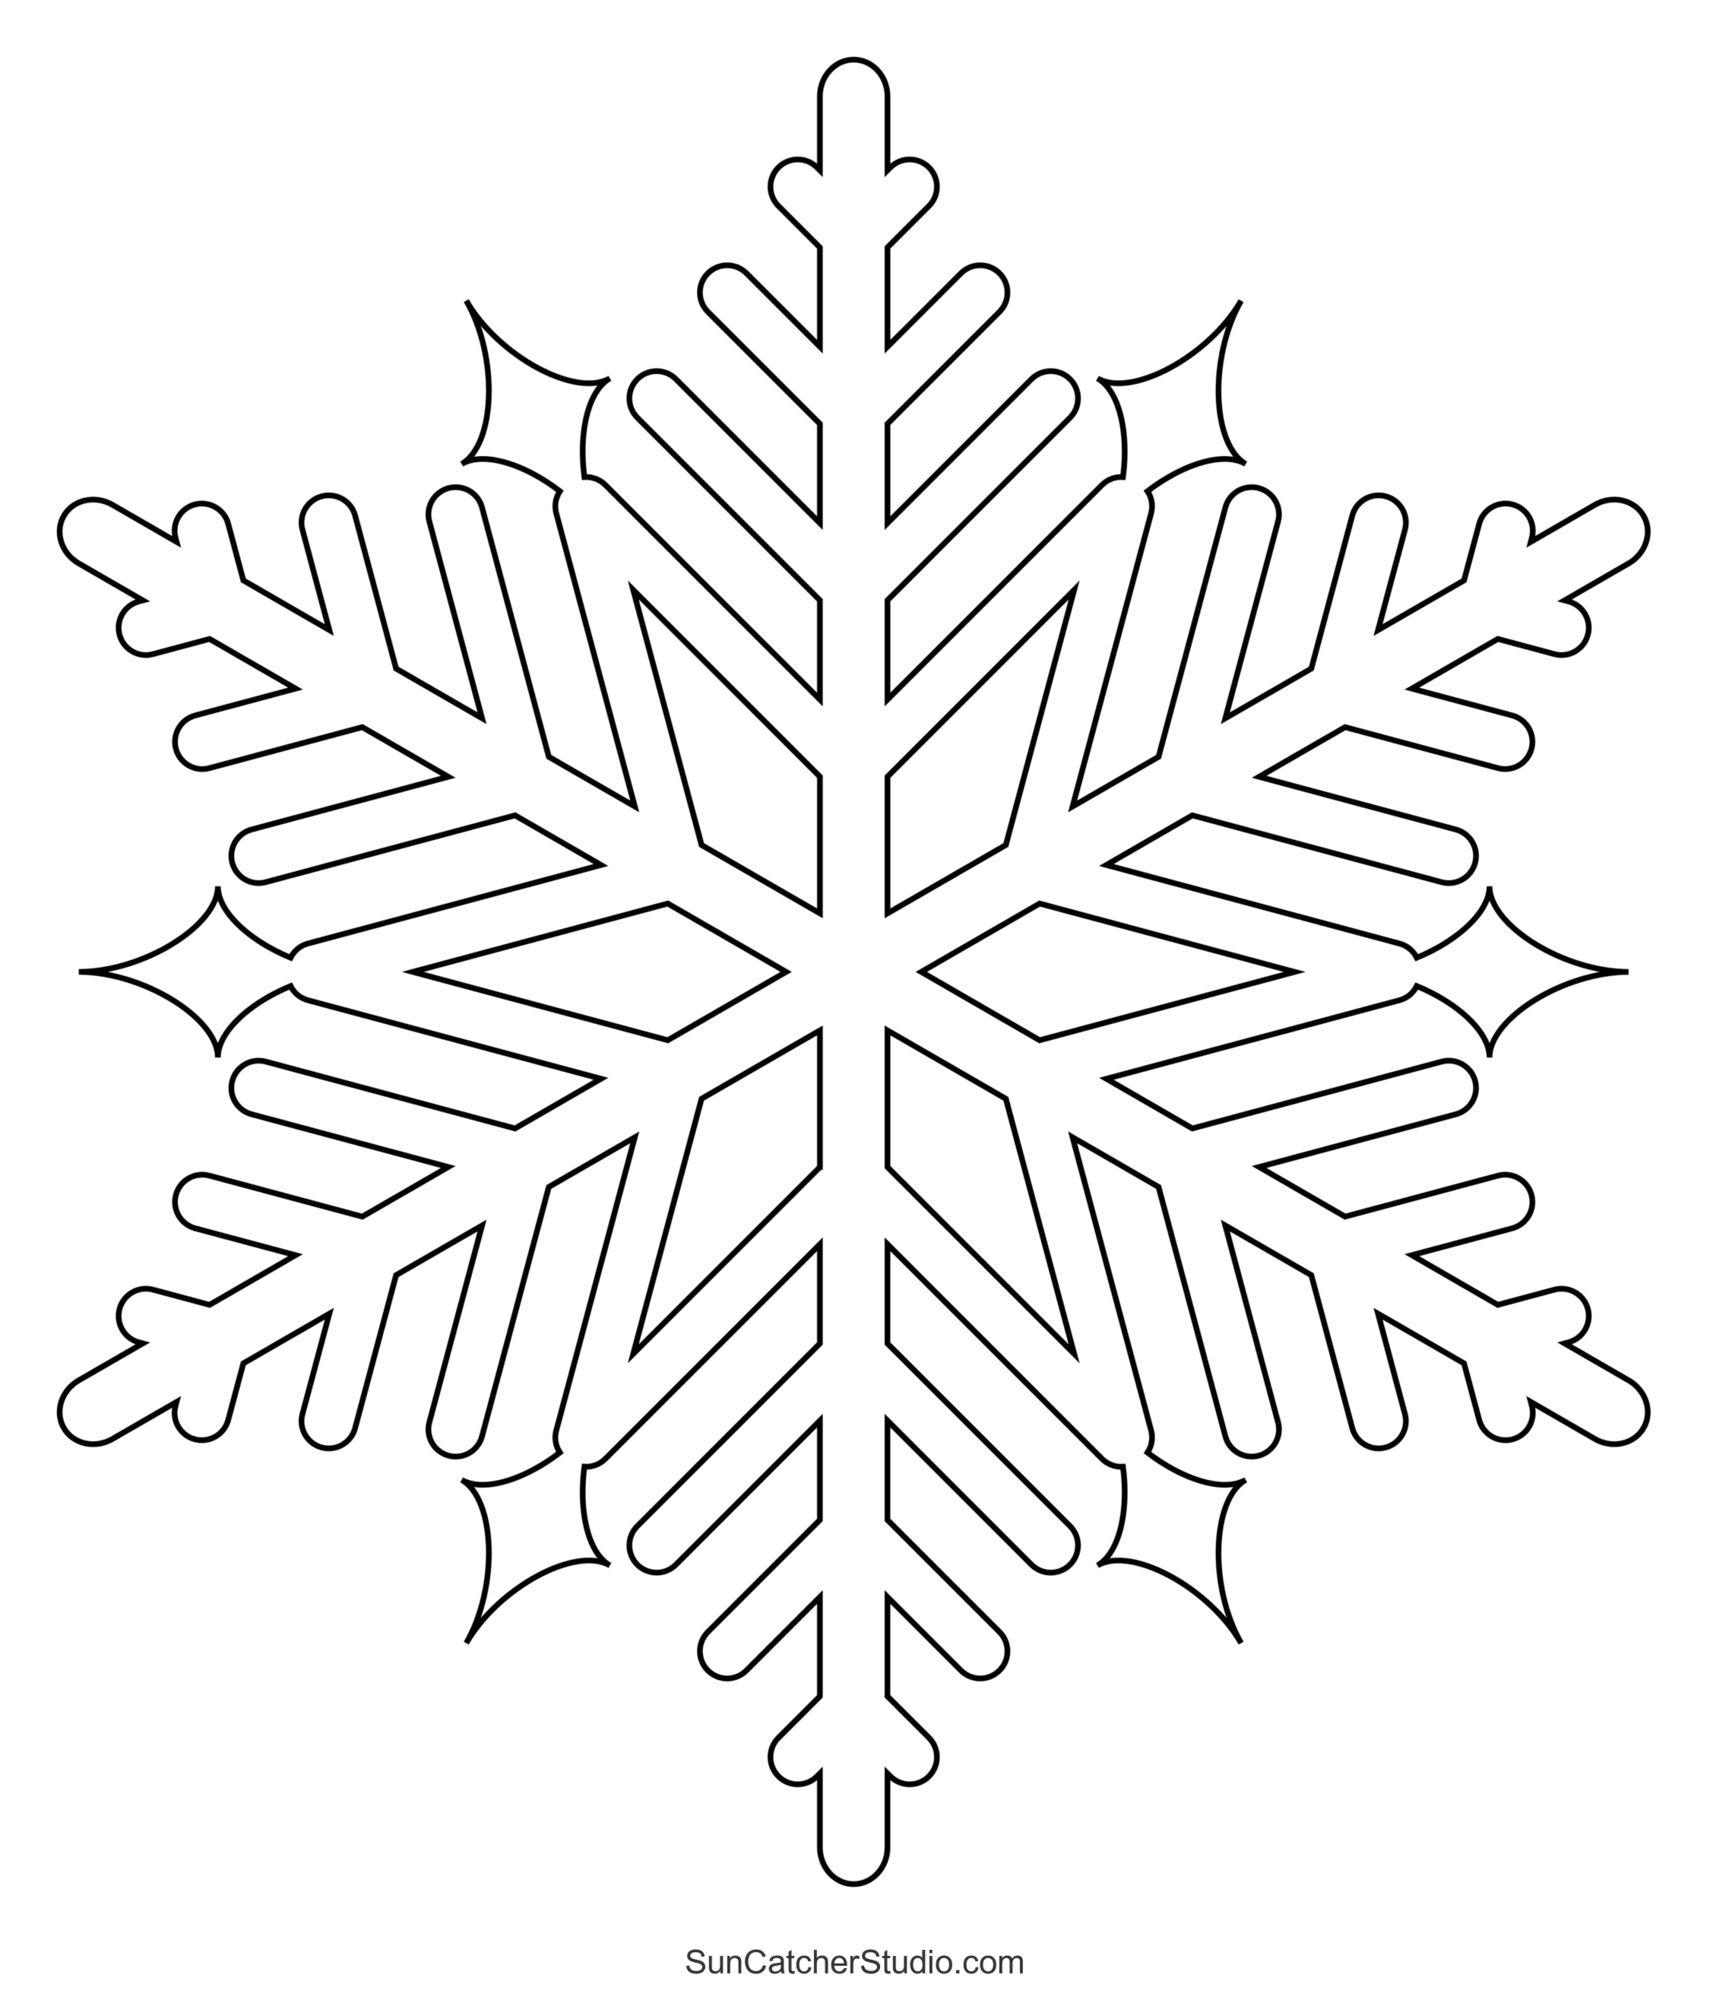 Snowflake Templates (Printable Stencils and Patterns) – DIY Projects,  Patterns, Monogr…